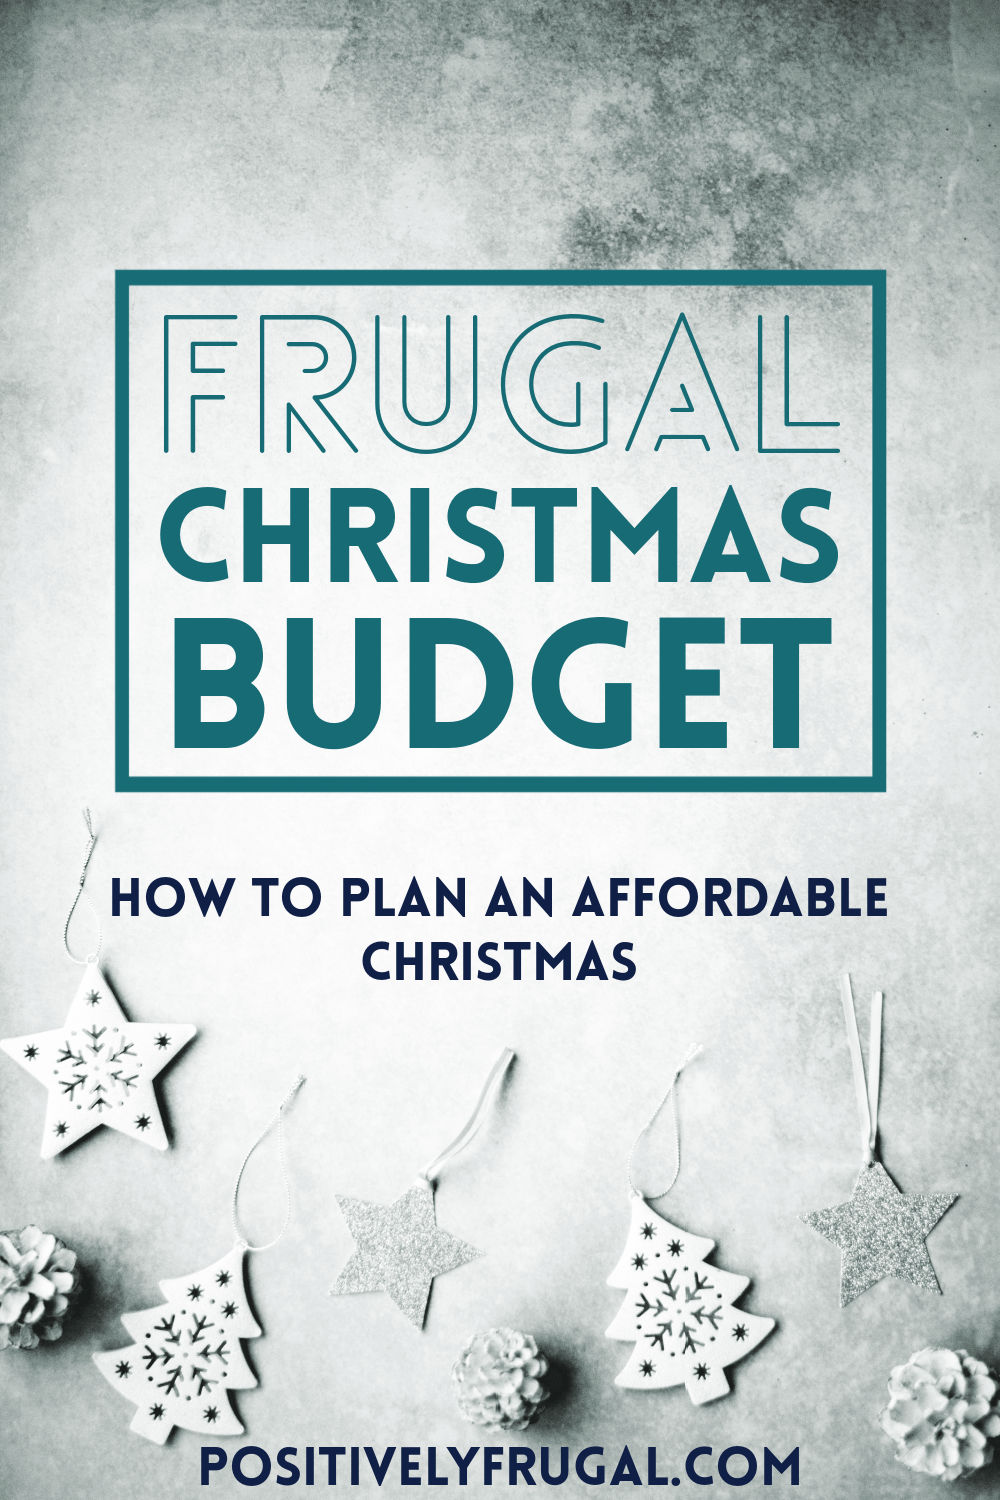 Frugal Christmas Budget Affordable Christmas by PositivelyFrugal.com